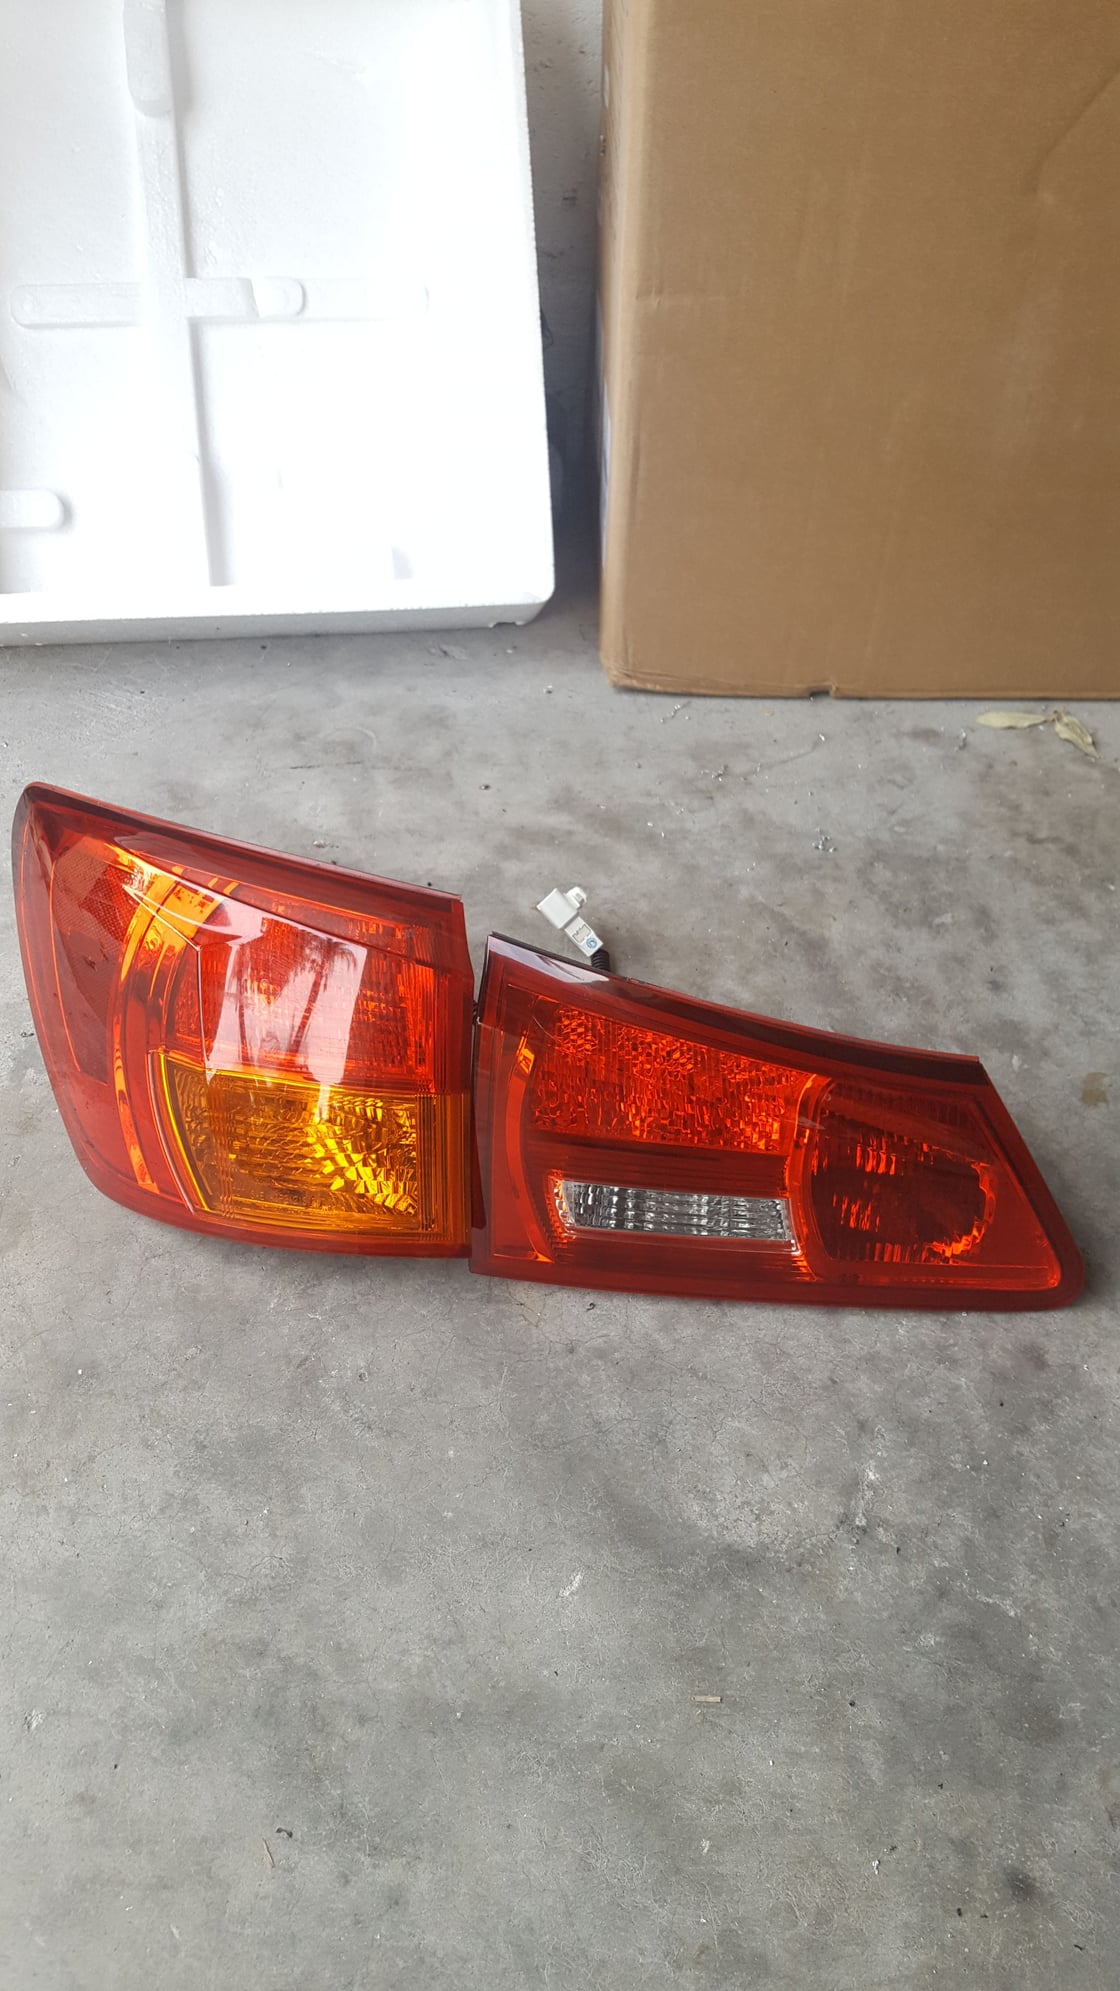 Exterior Body Parts - FS: ISx50 parts - 2IS Headlights, Taillights, OEM 18" Wheels, Air Intake - Used - 2006 to 2013 Lexus IS250 - 2006 to 2013 Lexus IS350 - Orlando, FL 32828, United States